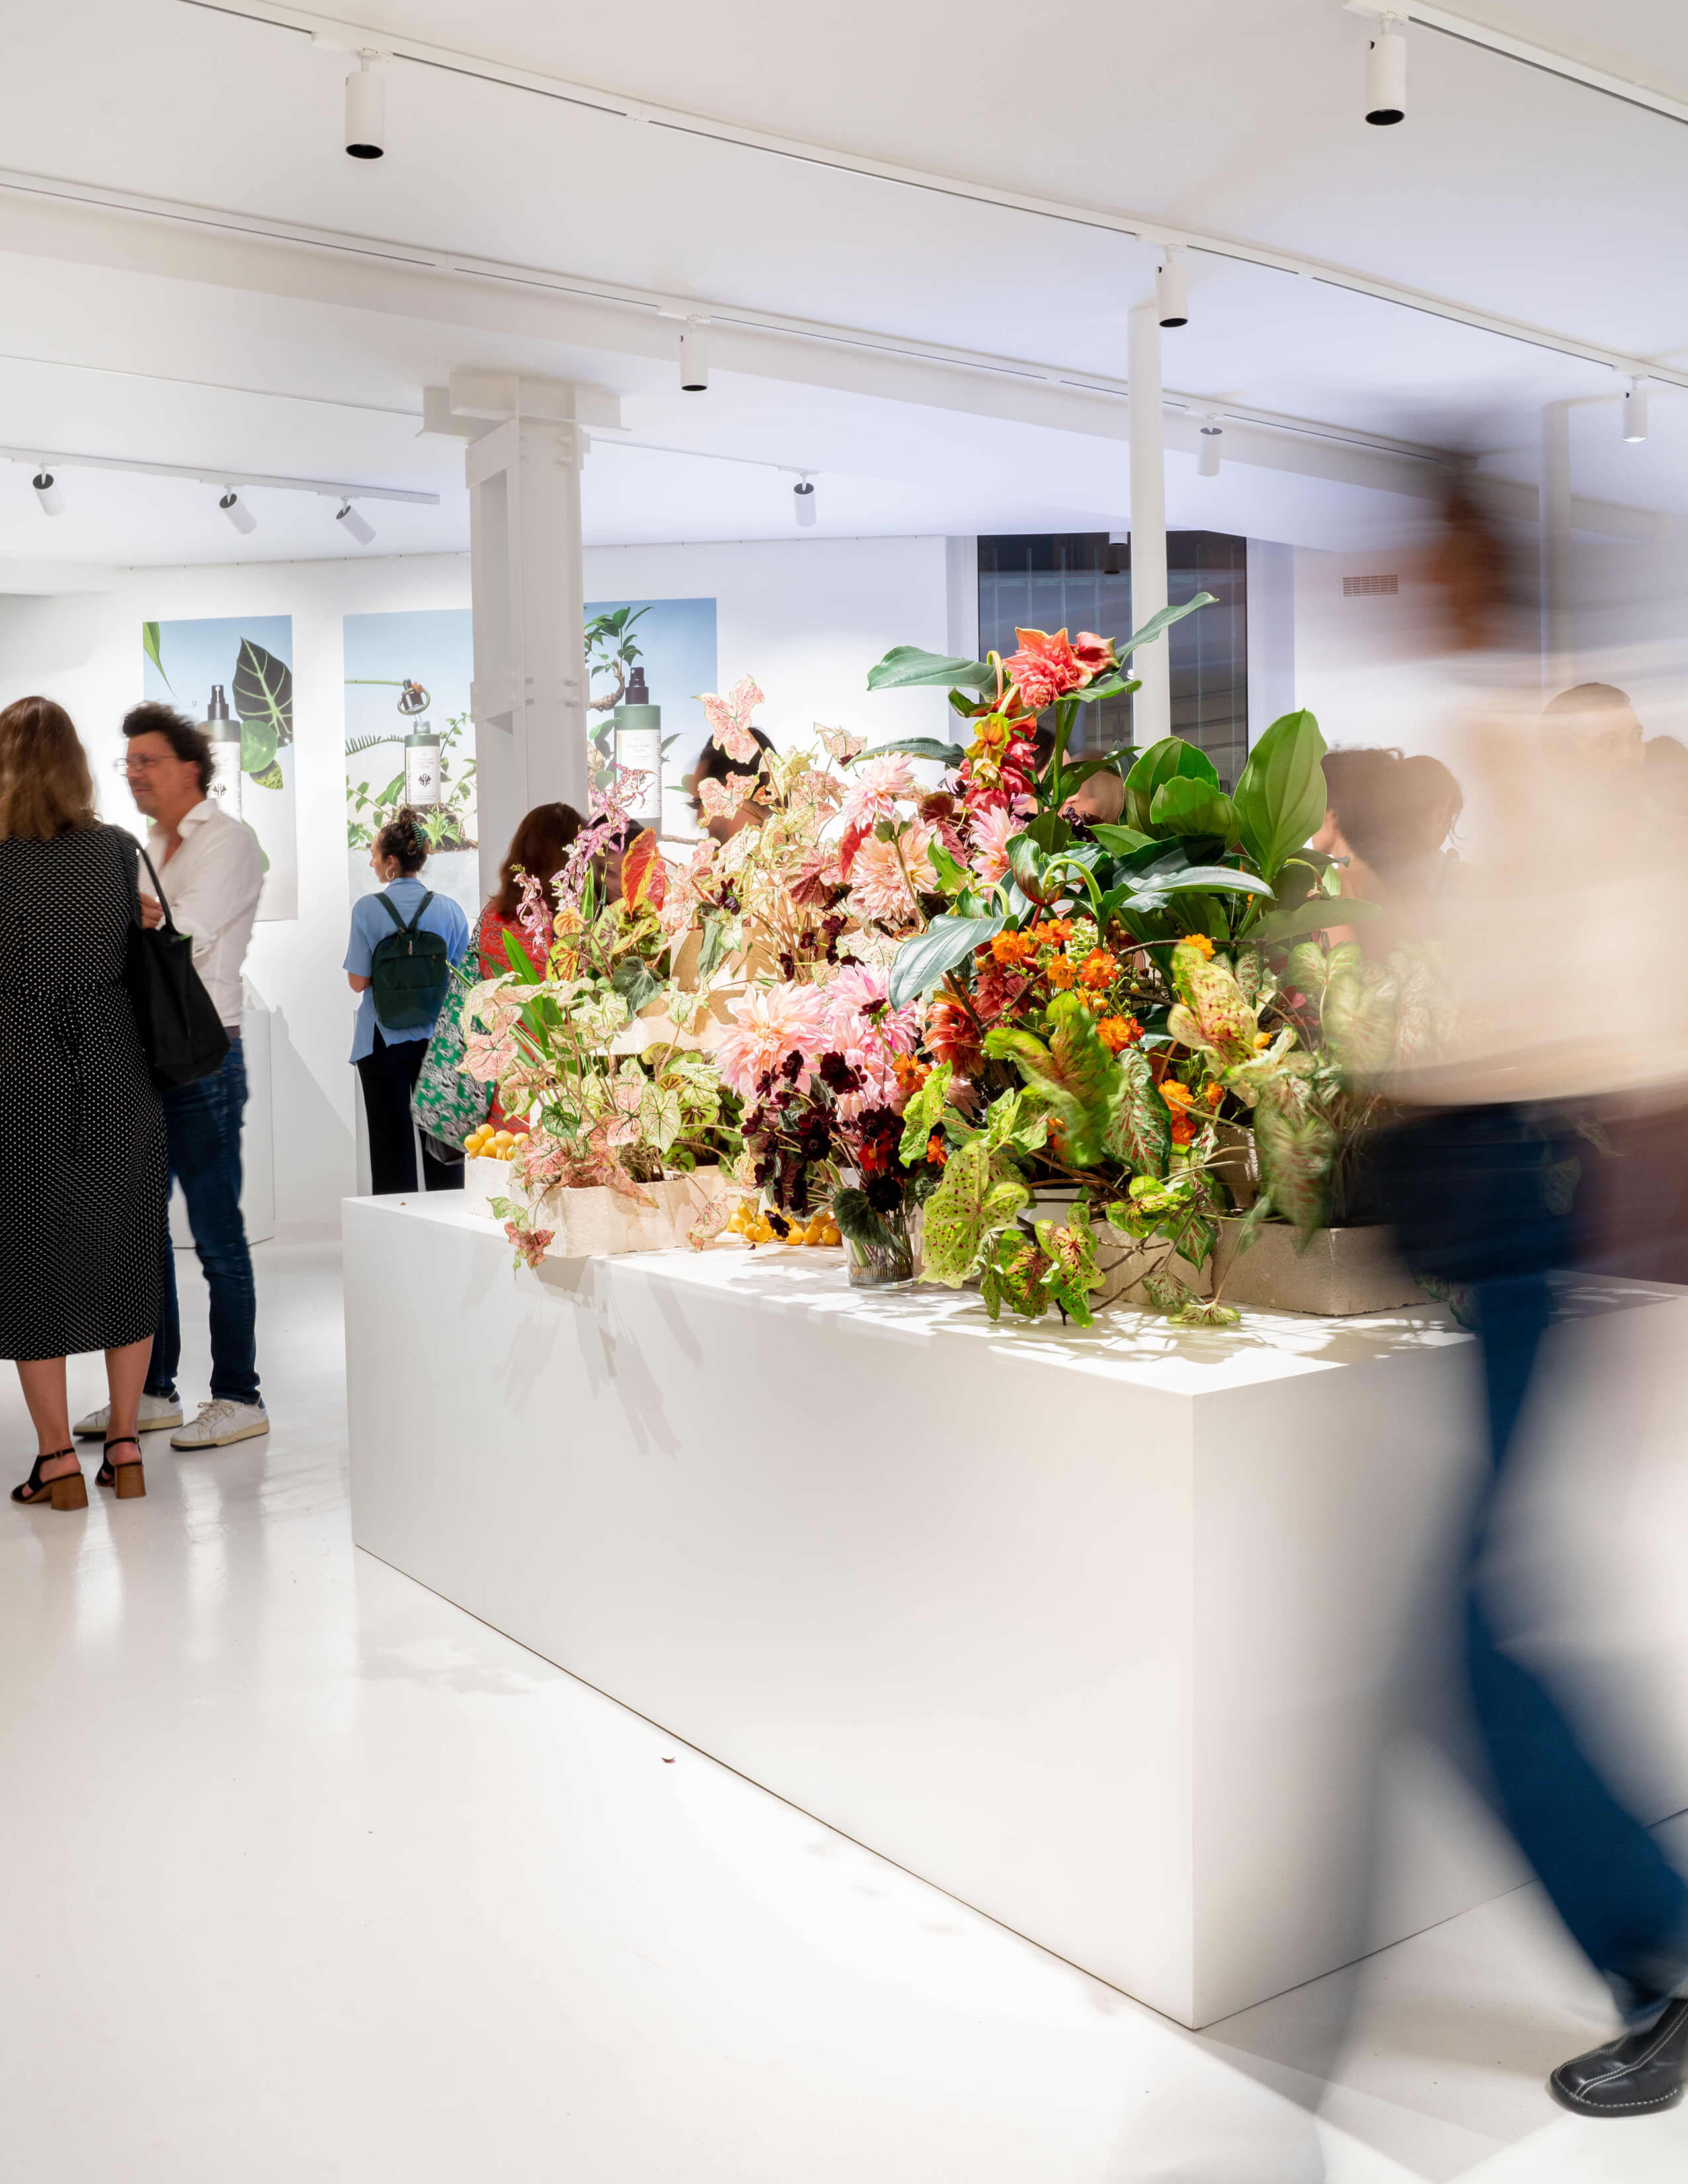 An extensive collection of flowers and plants presented nicely in the centre of the shop while the crowds surrounded it.